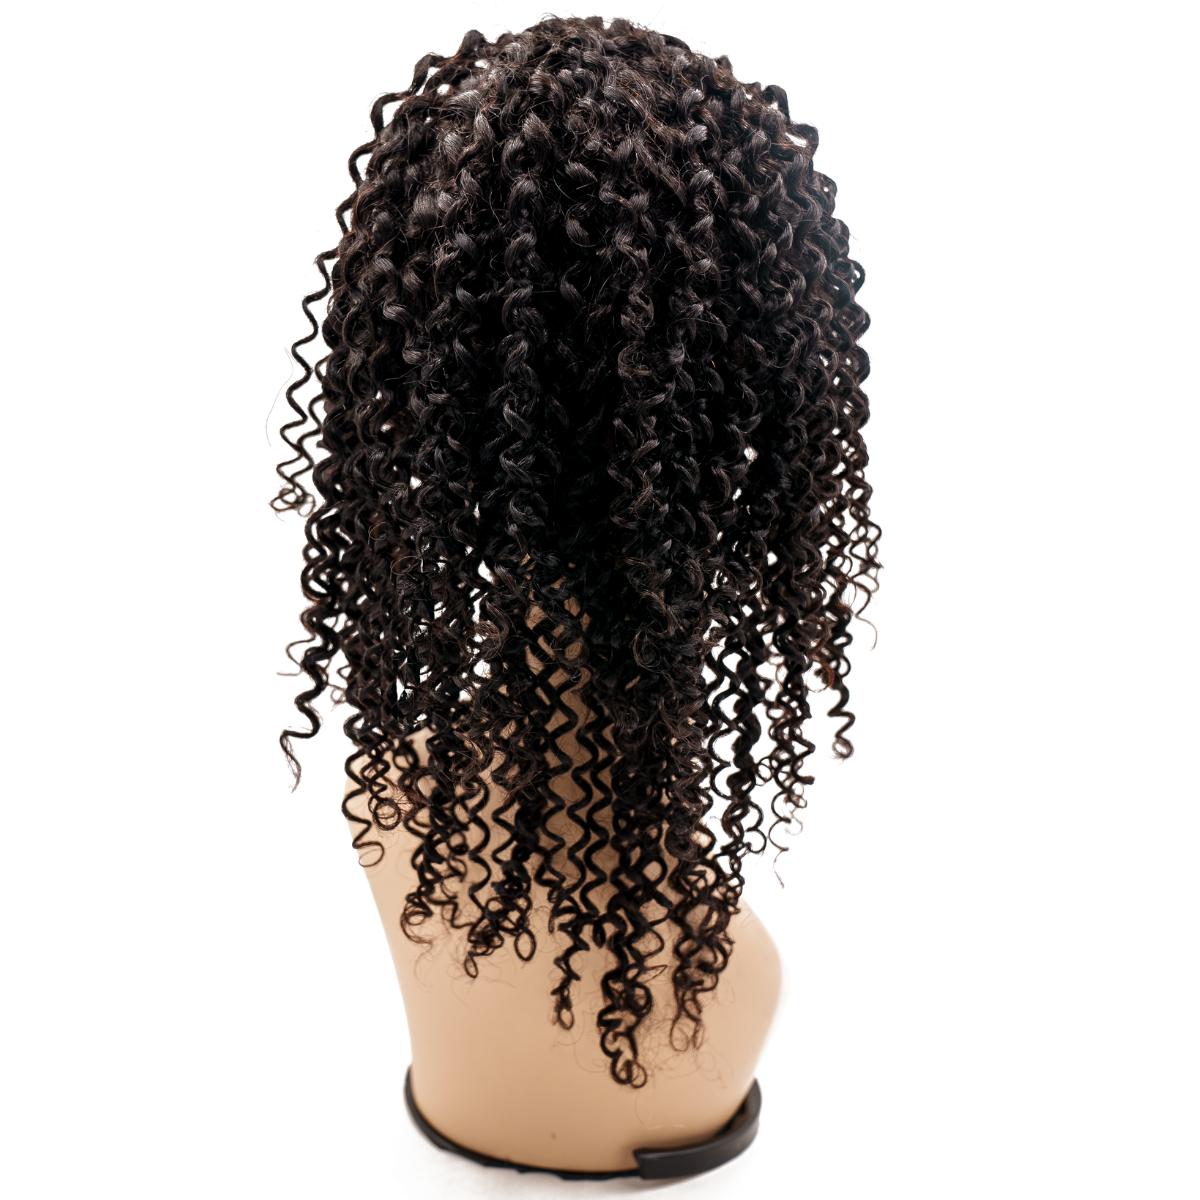 curly Fine mono base french lace medical wig